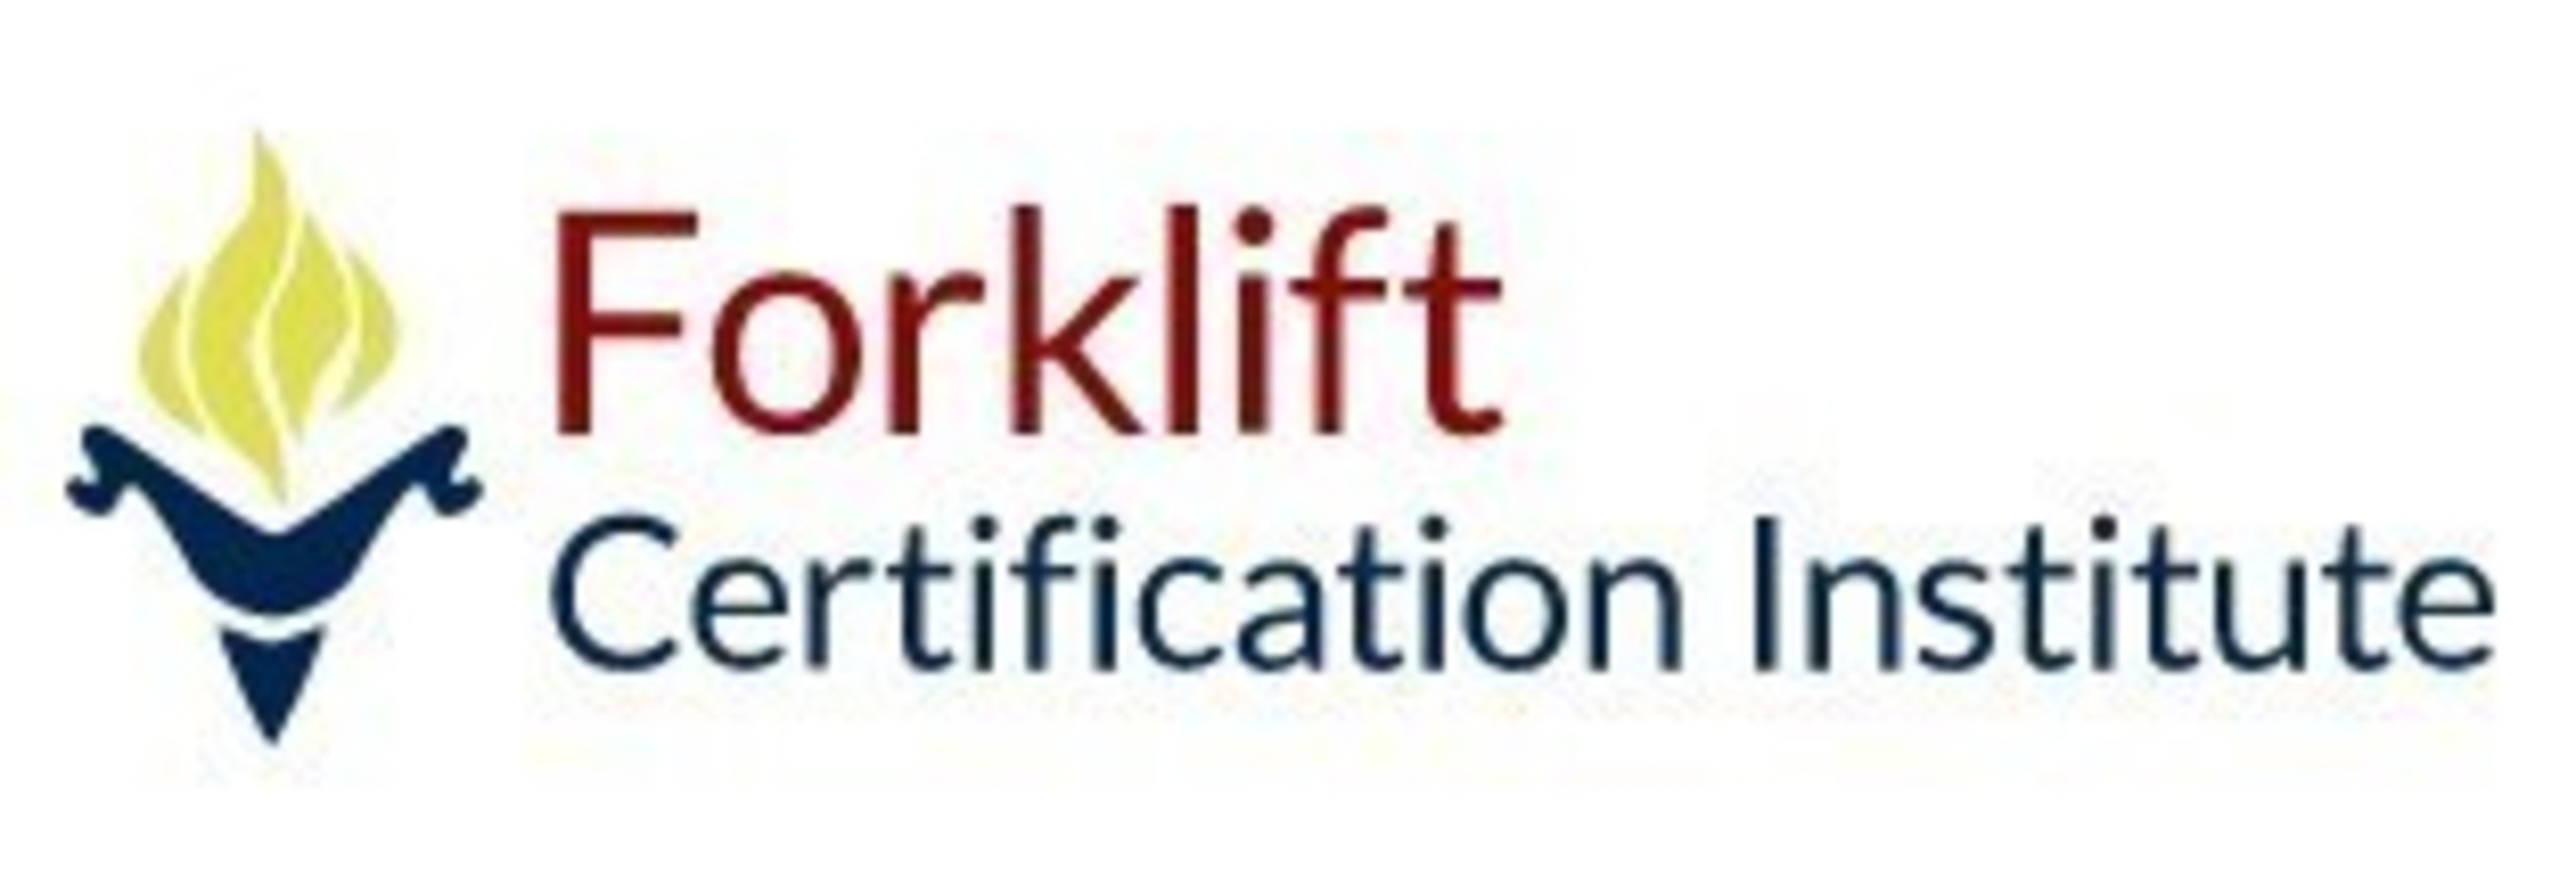 The Forklift Certification Institute Announces 100 Online Forklift Certification Course